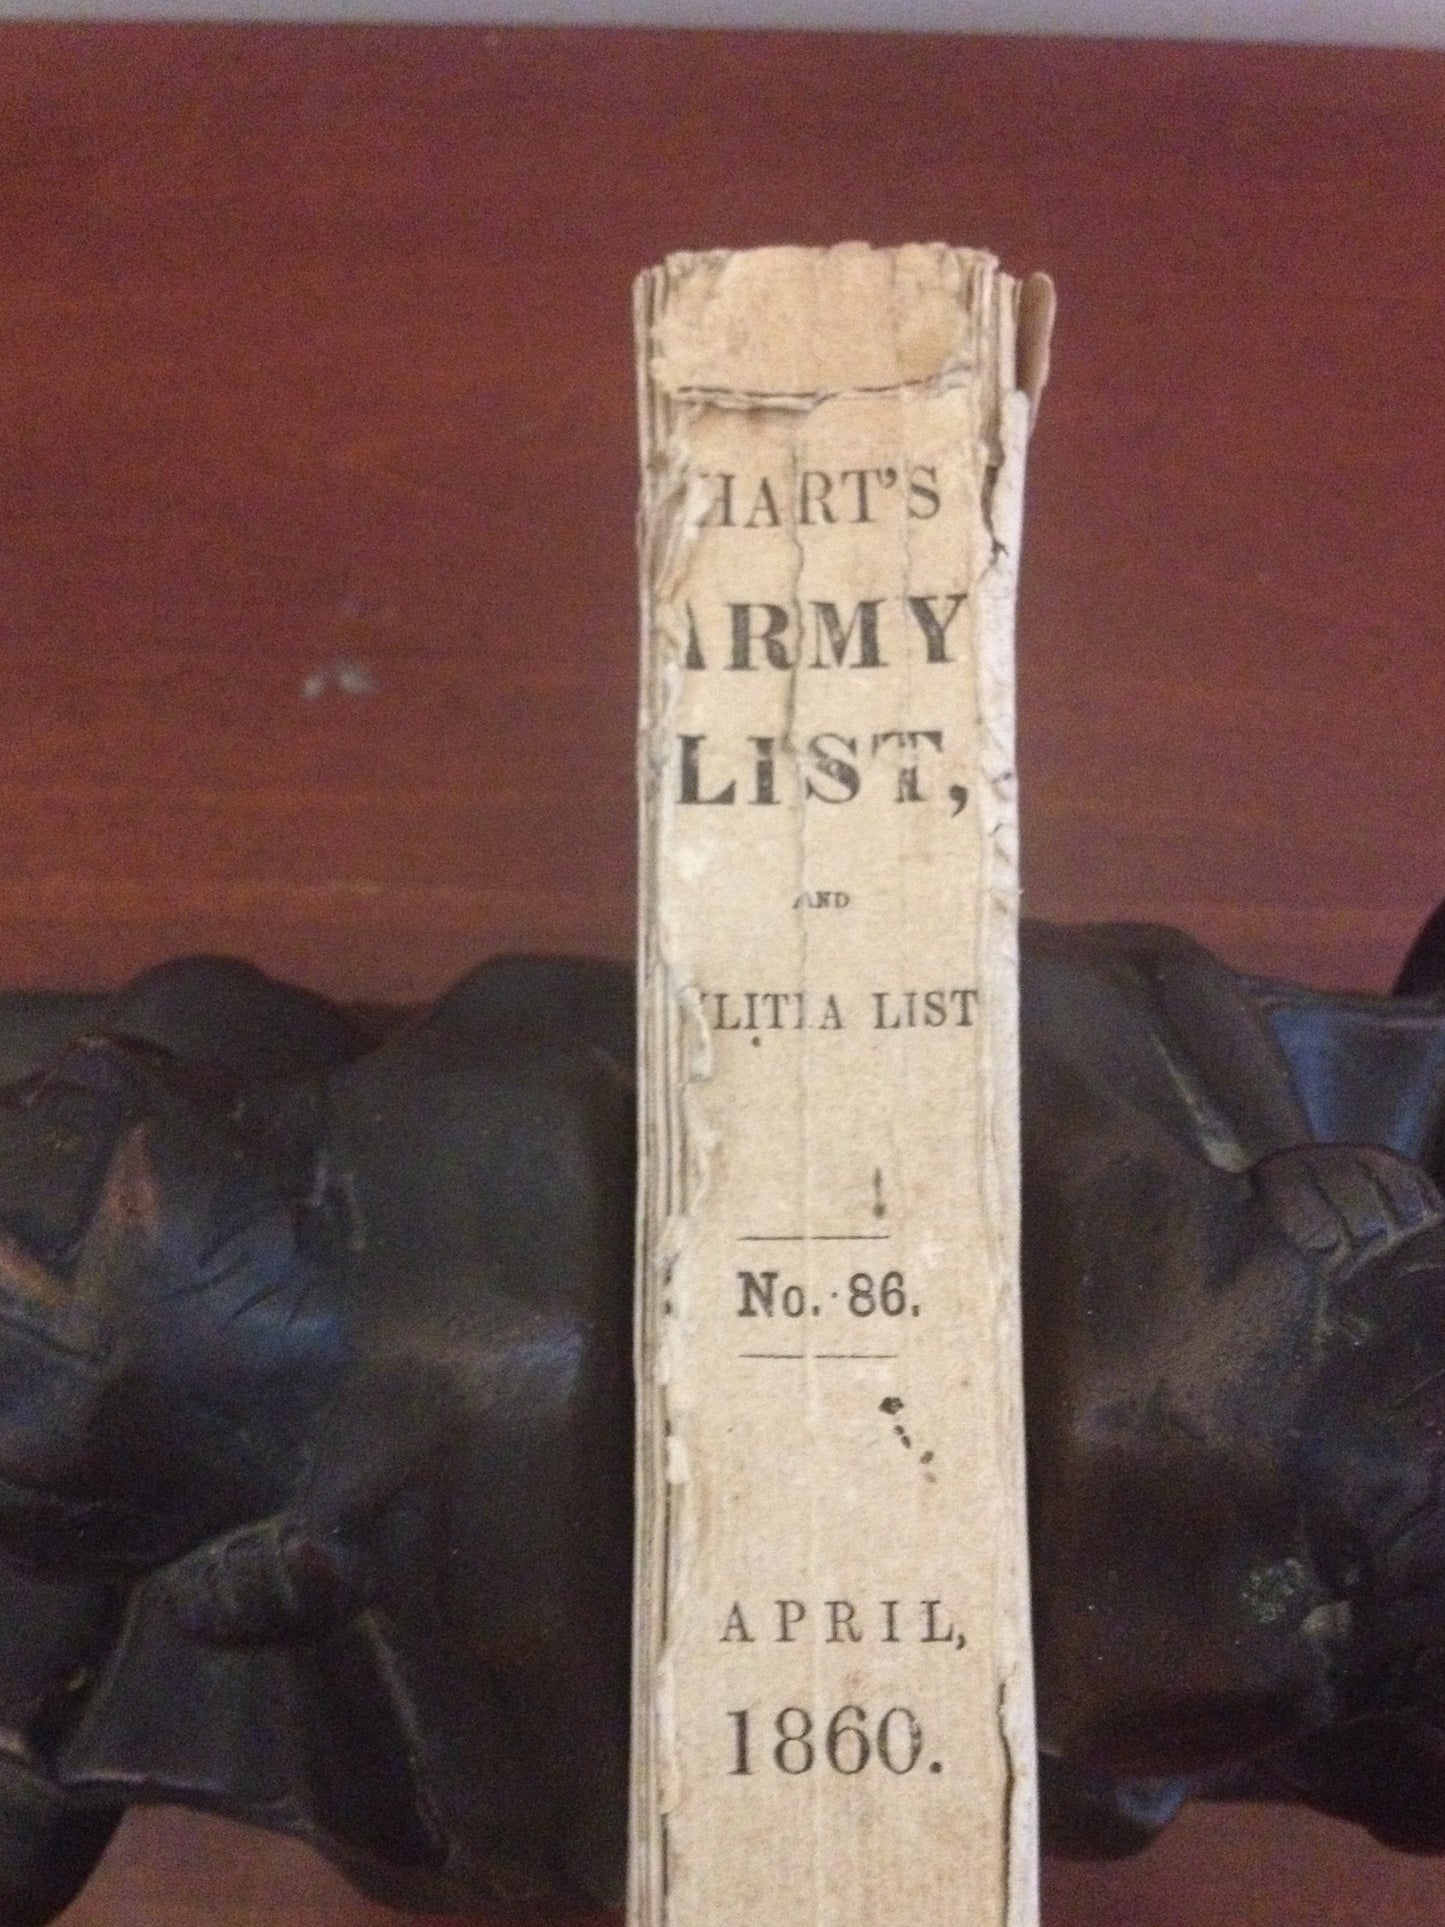 HARTS ARMY LIST, AND MILITIA LIST; EXHIBITING THE RANK ON FULL PAY - H.G. HART